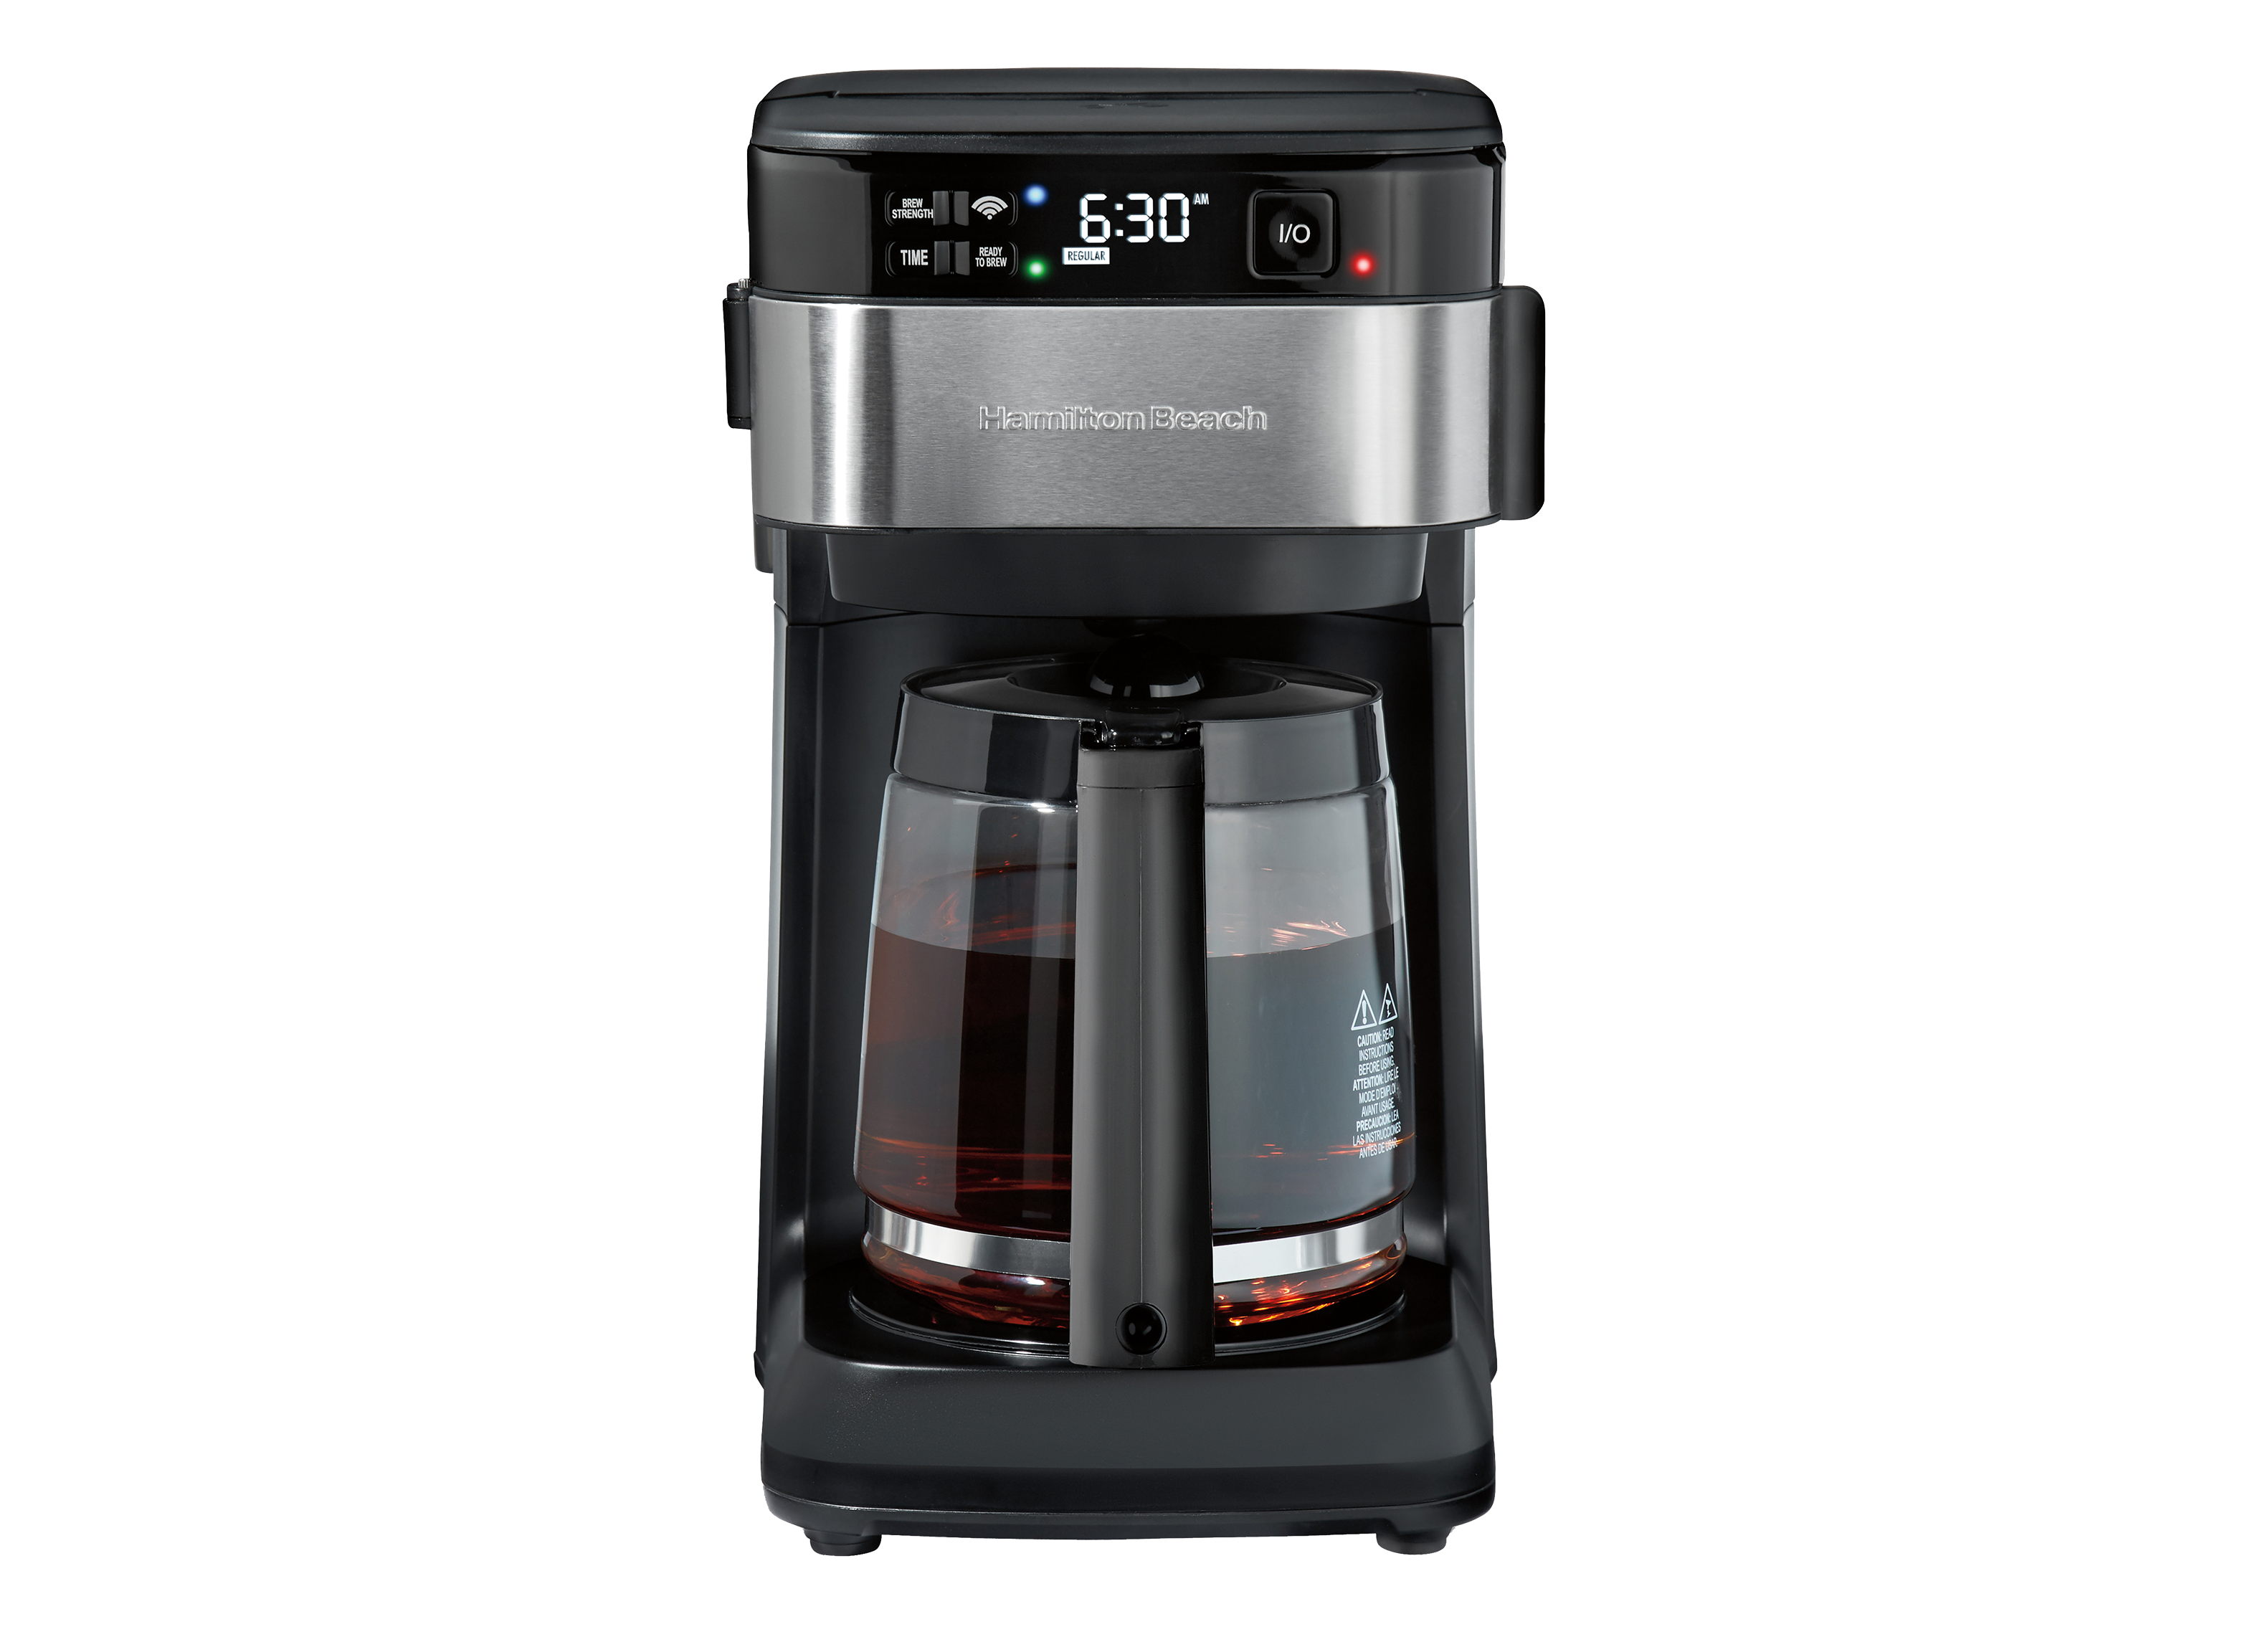 Hamilton Beach Works with Alexa Smart Coffee Maker, Programmable, 12 Cup  Capacity, Black and Stainless Steel (49350) – A Certified for Humans Device